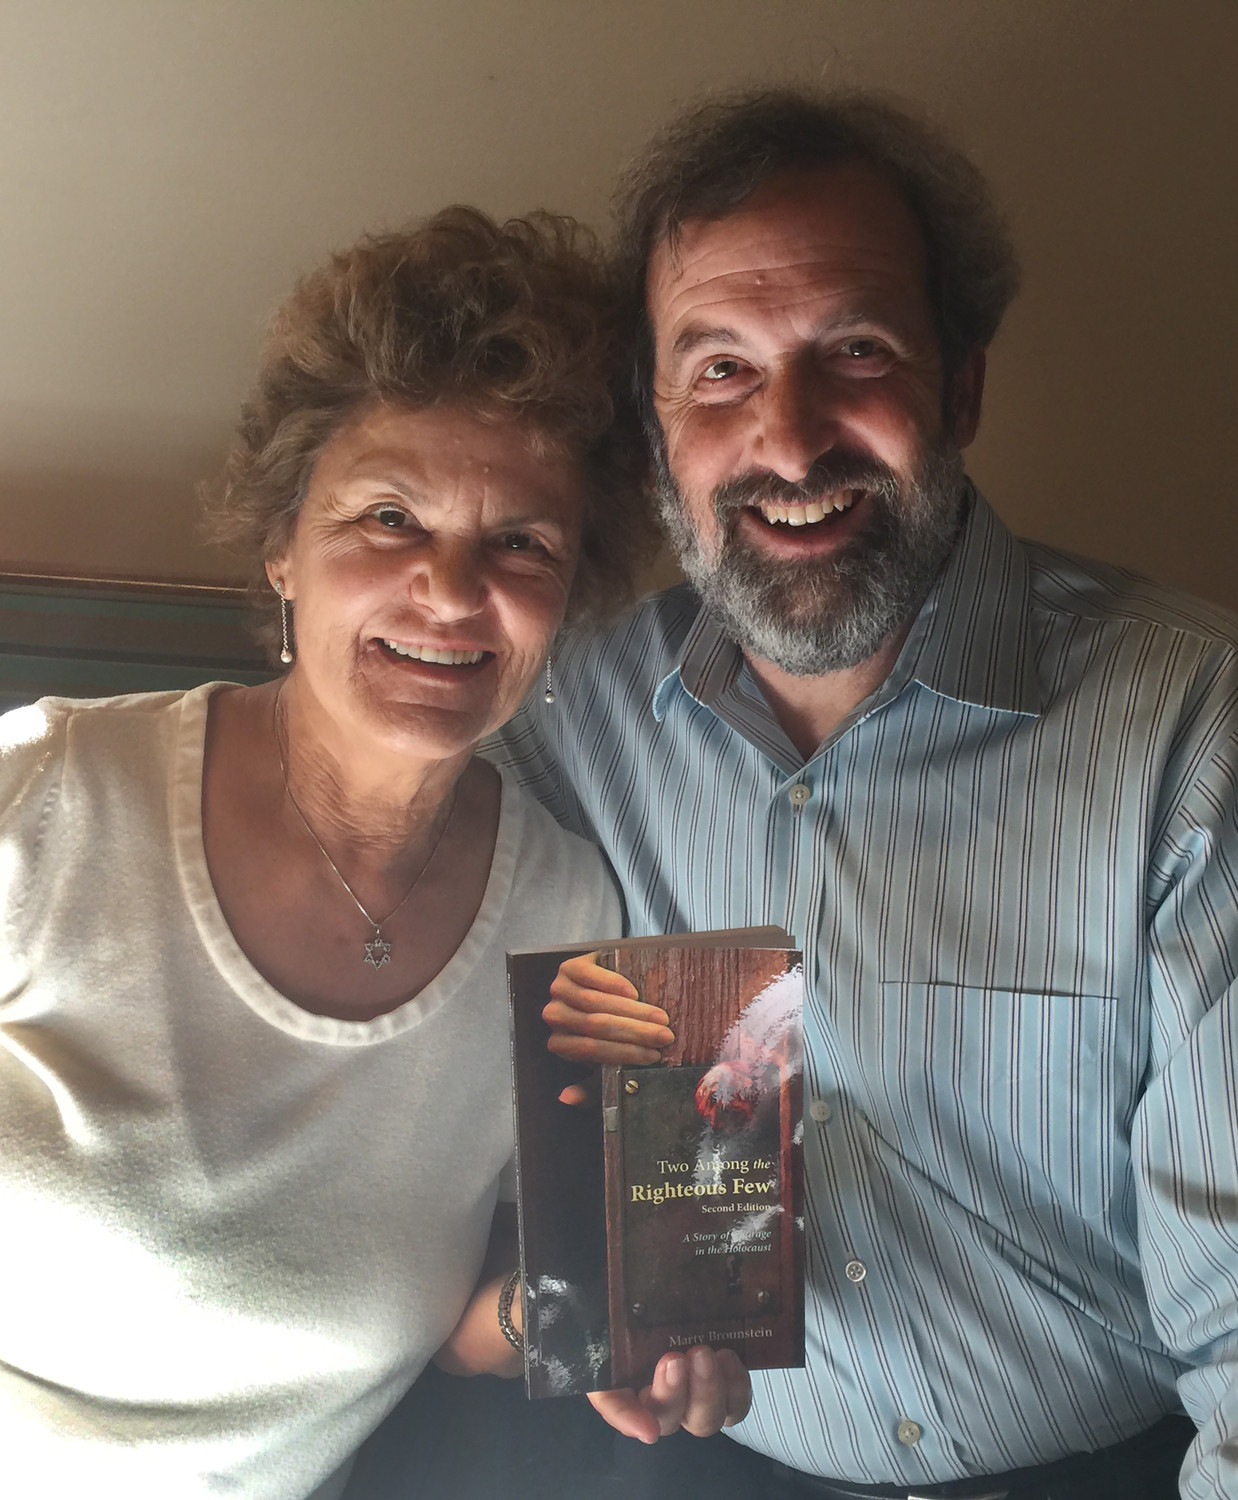 Marty Brounstein, author of “Two Among the Righteous Few: A Story of Courage in the Holocaust,” poses in early April with his wife, Leah Baars.